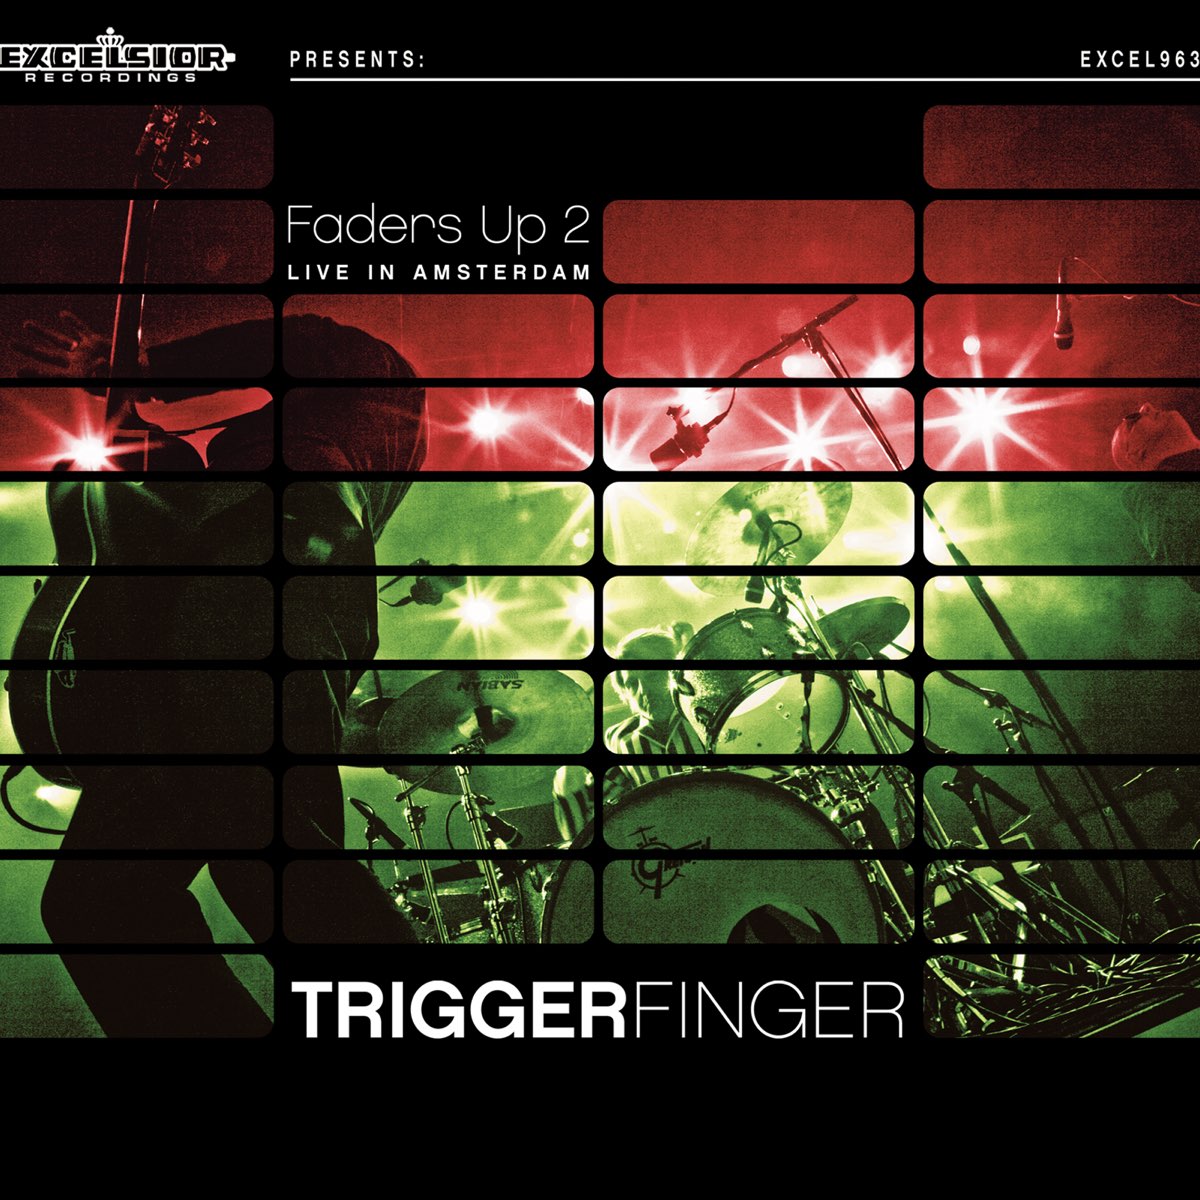 Up live home. Triggerfinger группа. Triggerfinger - i follow Rivers. Faders перевод. Fader up.